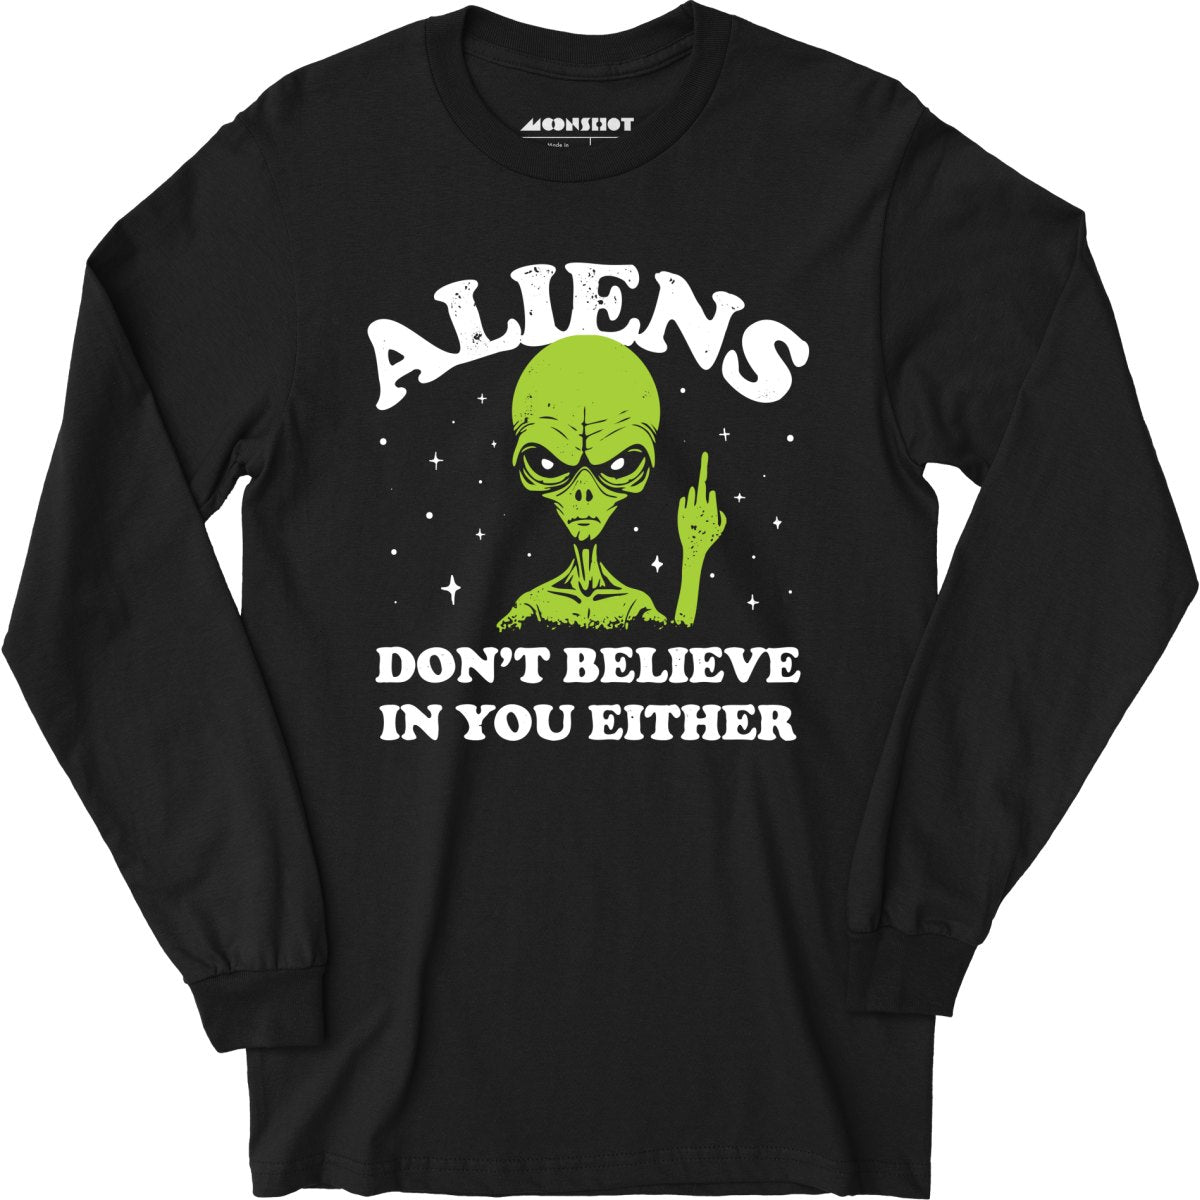 Aliens Don't Believe in You Either - Long Sleeve T-Shirt